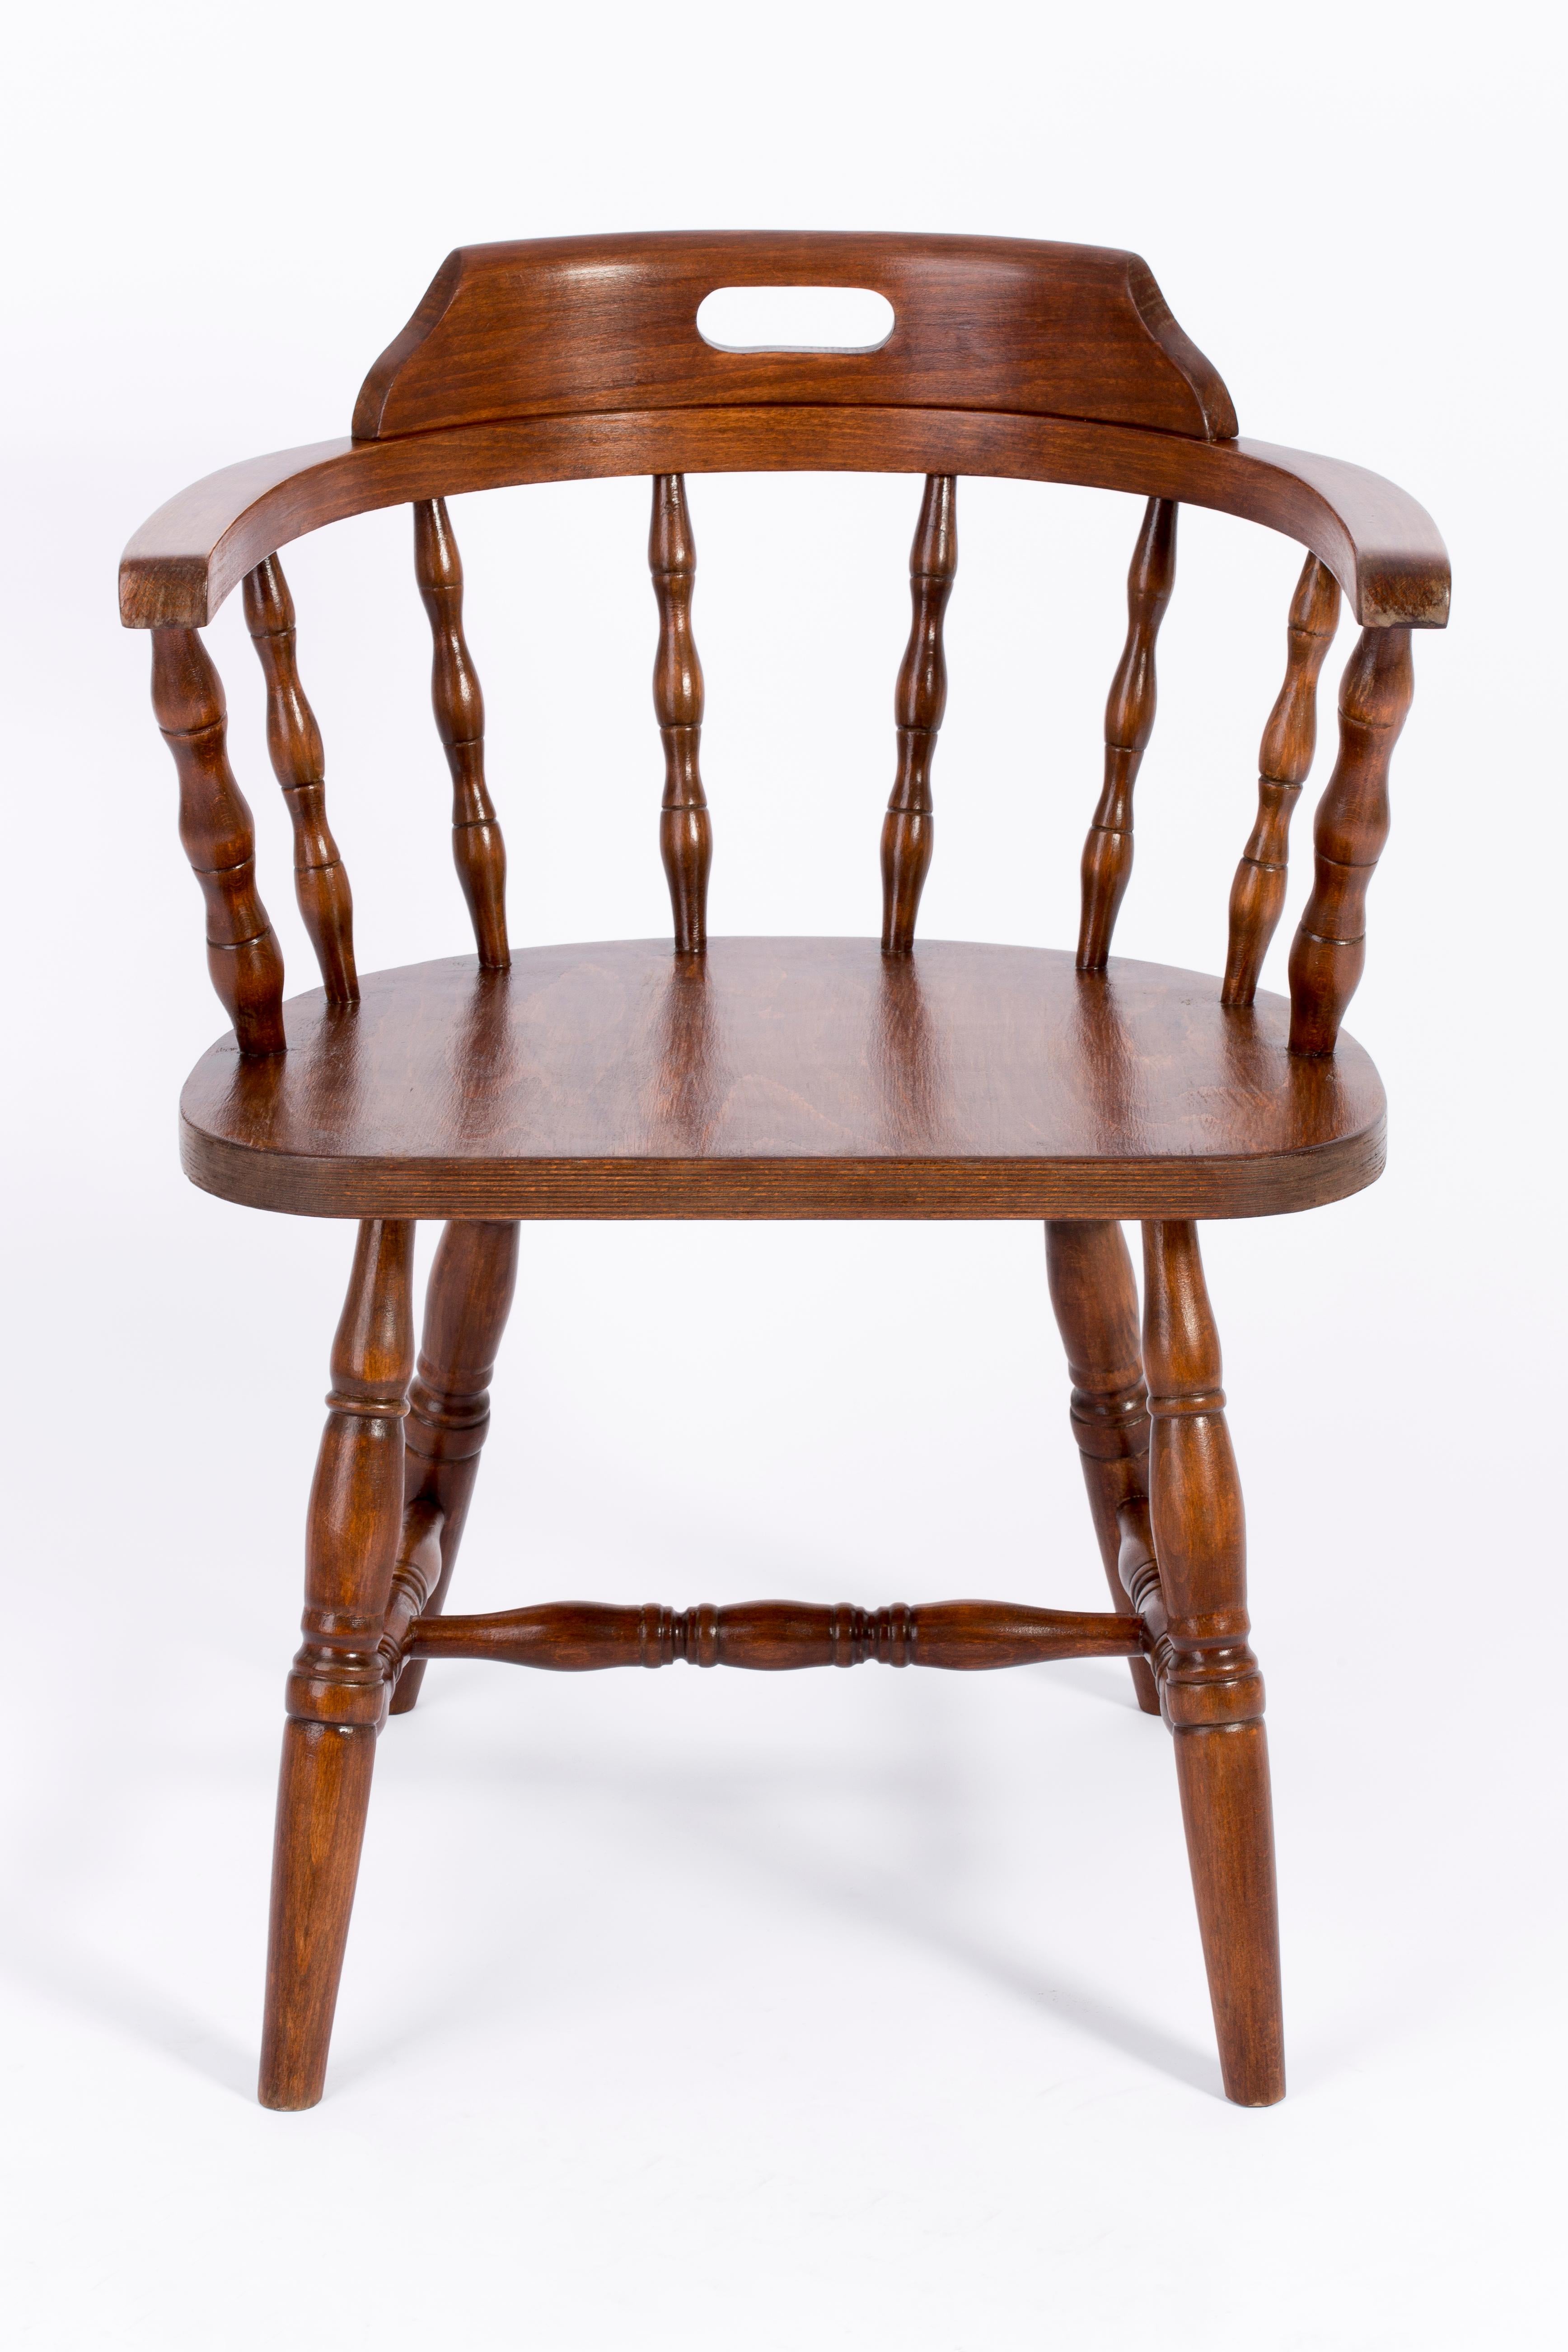 Chair designed by prof. Rajmund Halas. Made of beechwood. Chair is after a complete renovation, the woodwork has been refreshed. Chair is stabile and very shapely. Chair was produced in former furniture factory in Goleniów in the 1960s. We can